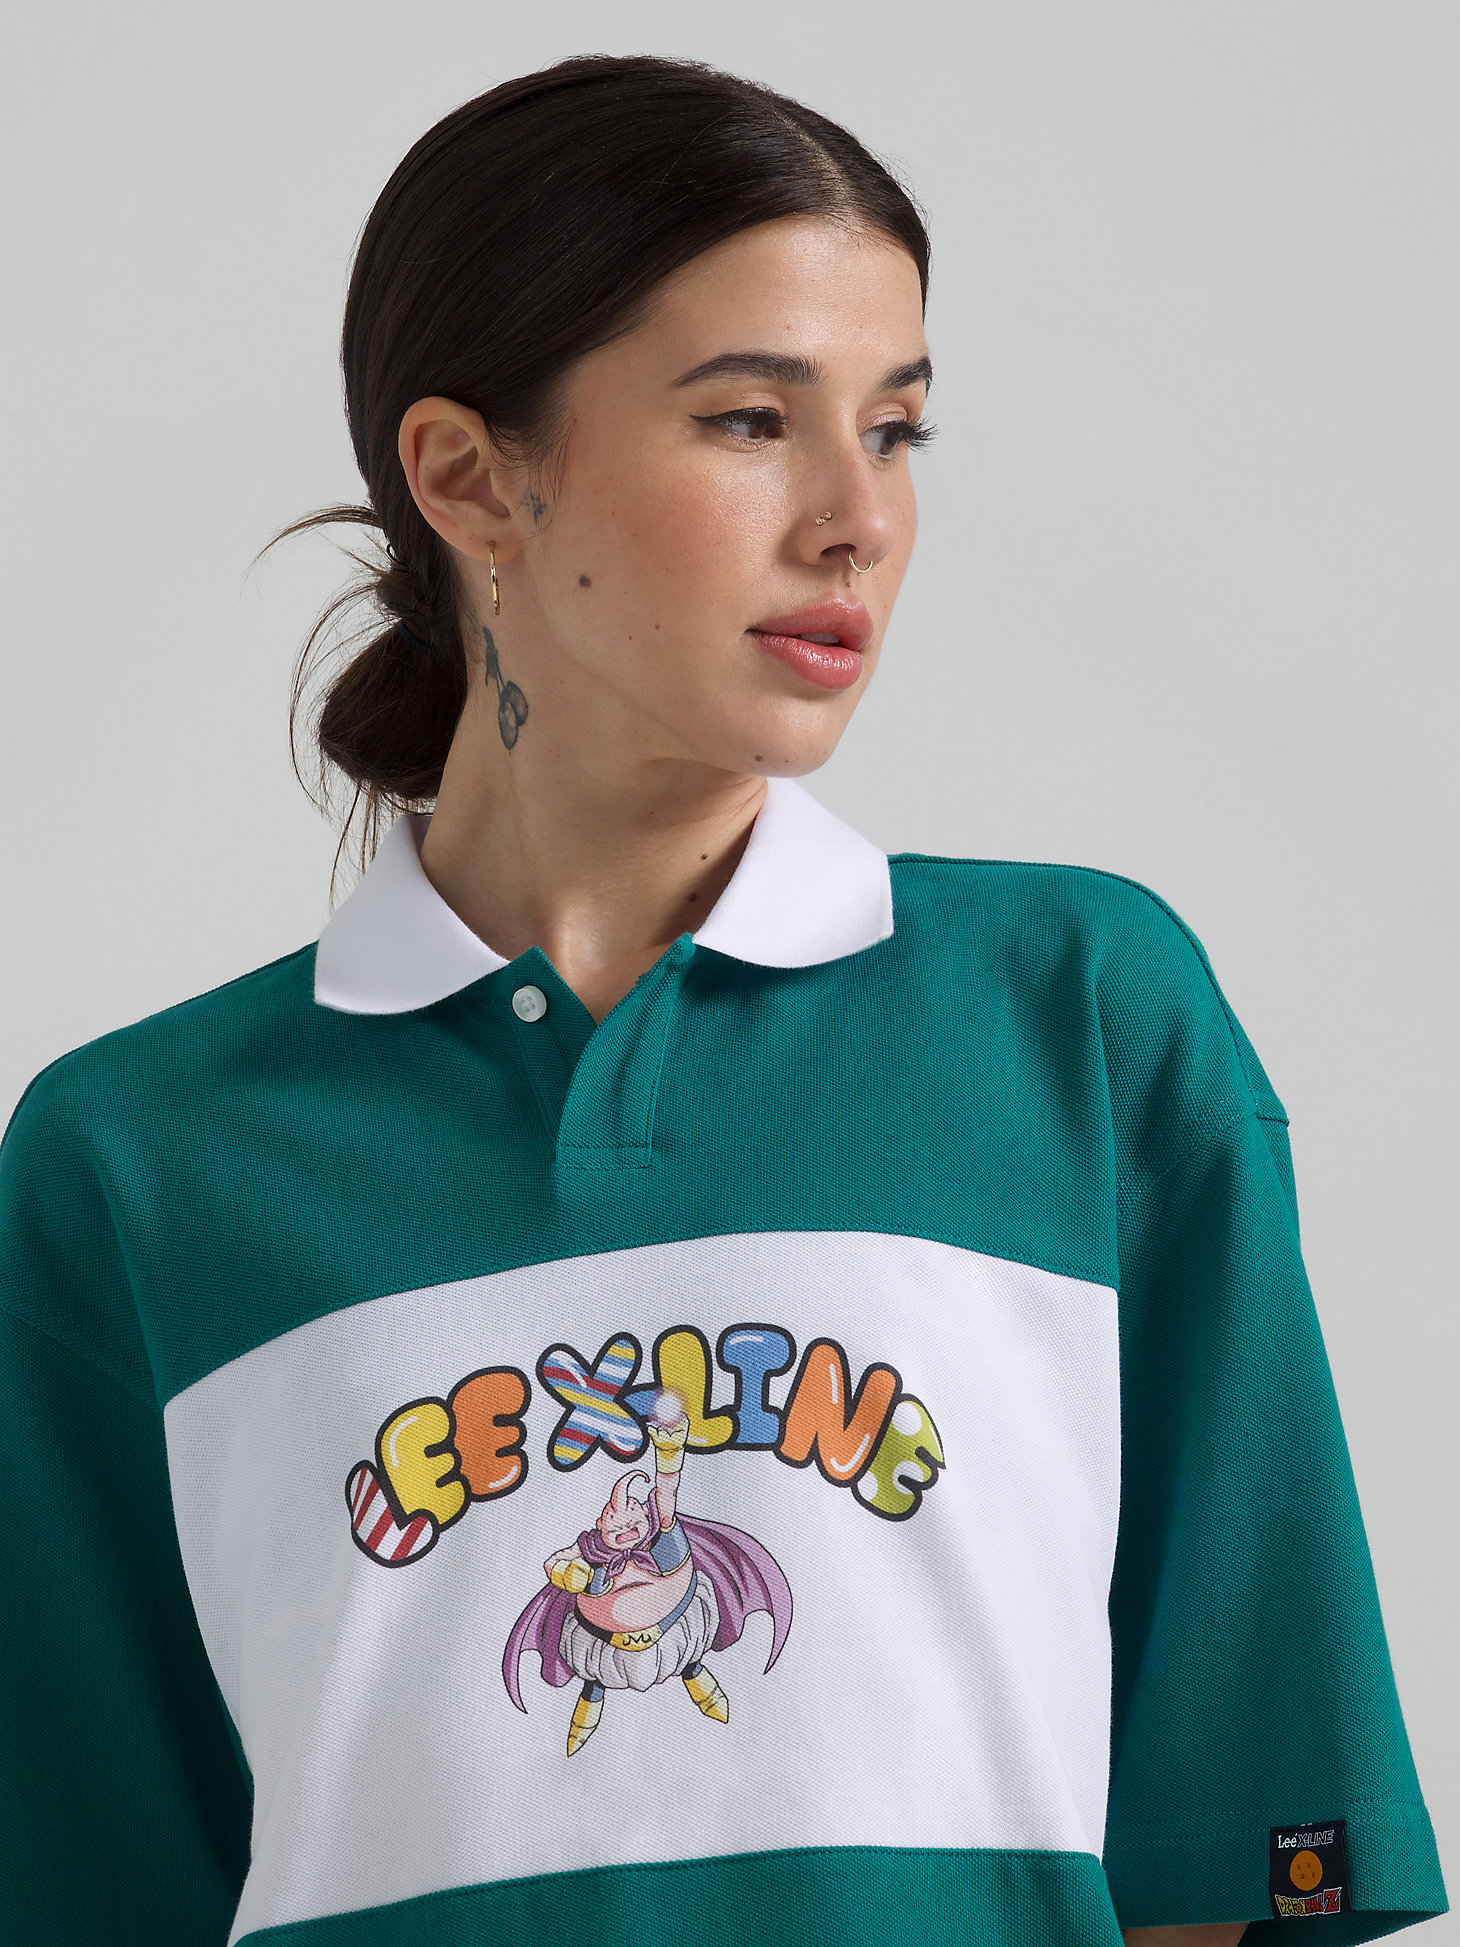 Unisex Lee and Dragon Ball Z Fat Buu Polo in Teal Green alternative view 5